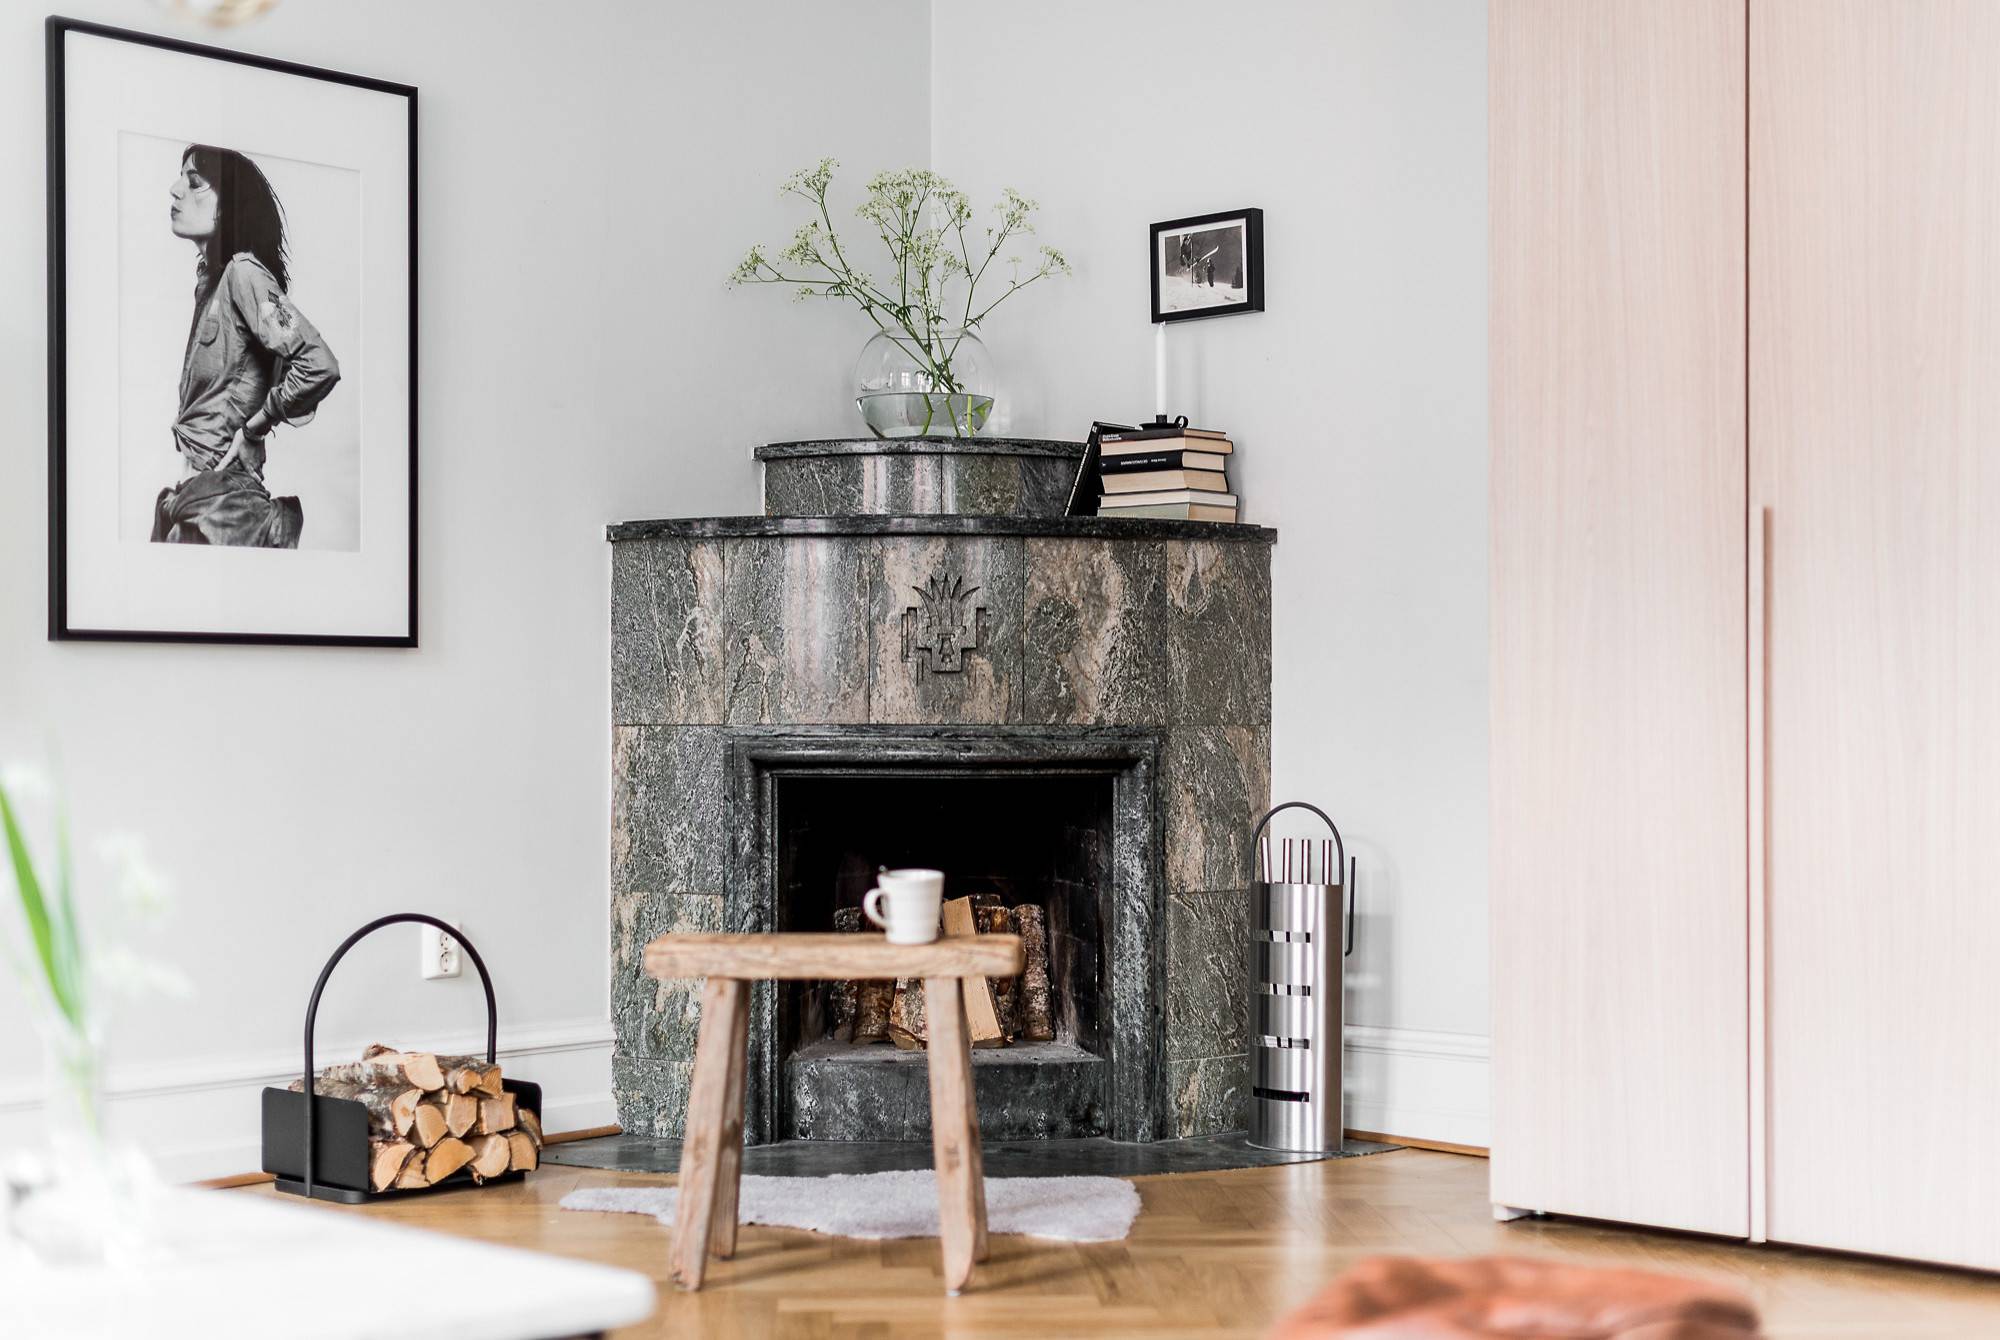 Cozy fireplace for homey feel (from Houzz)